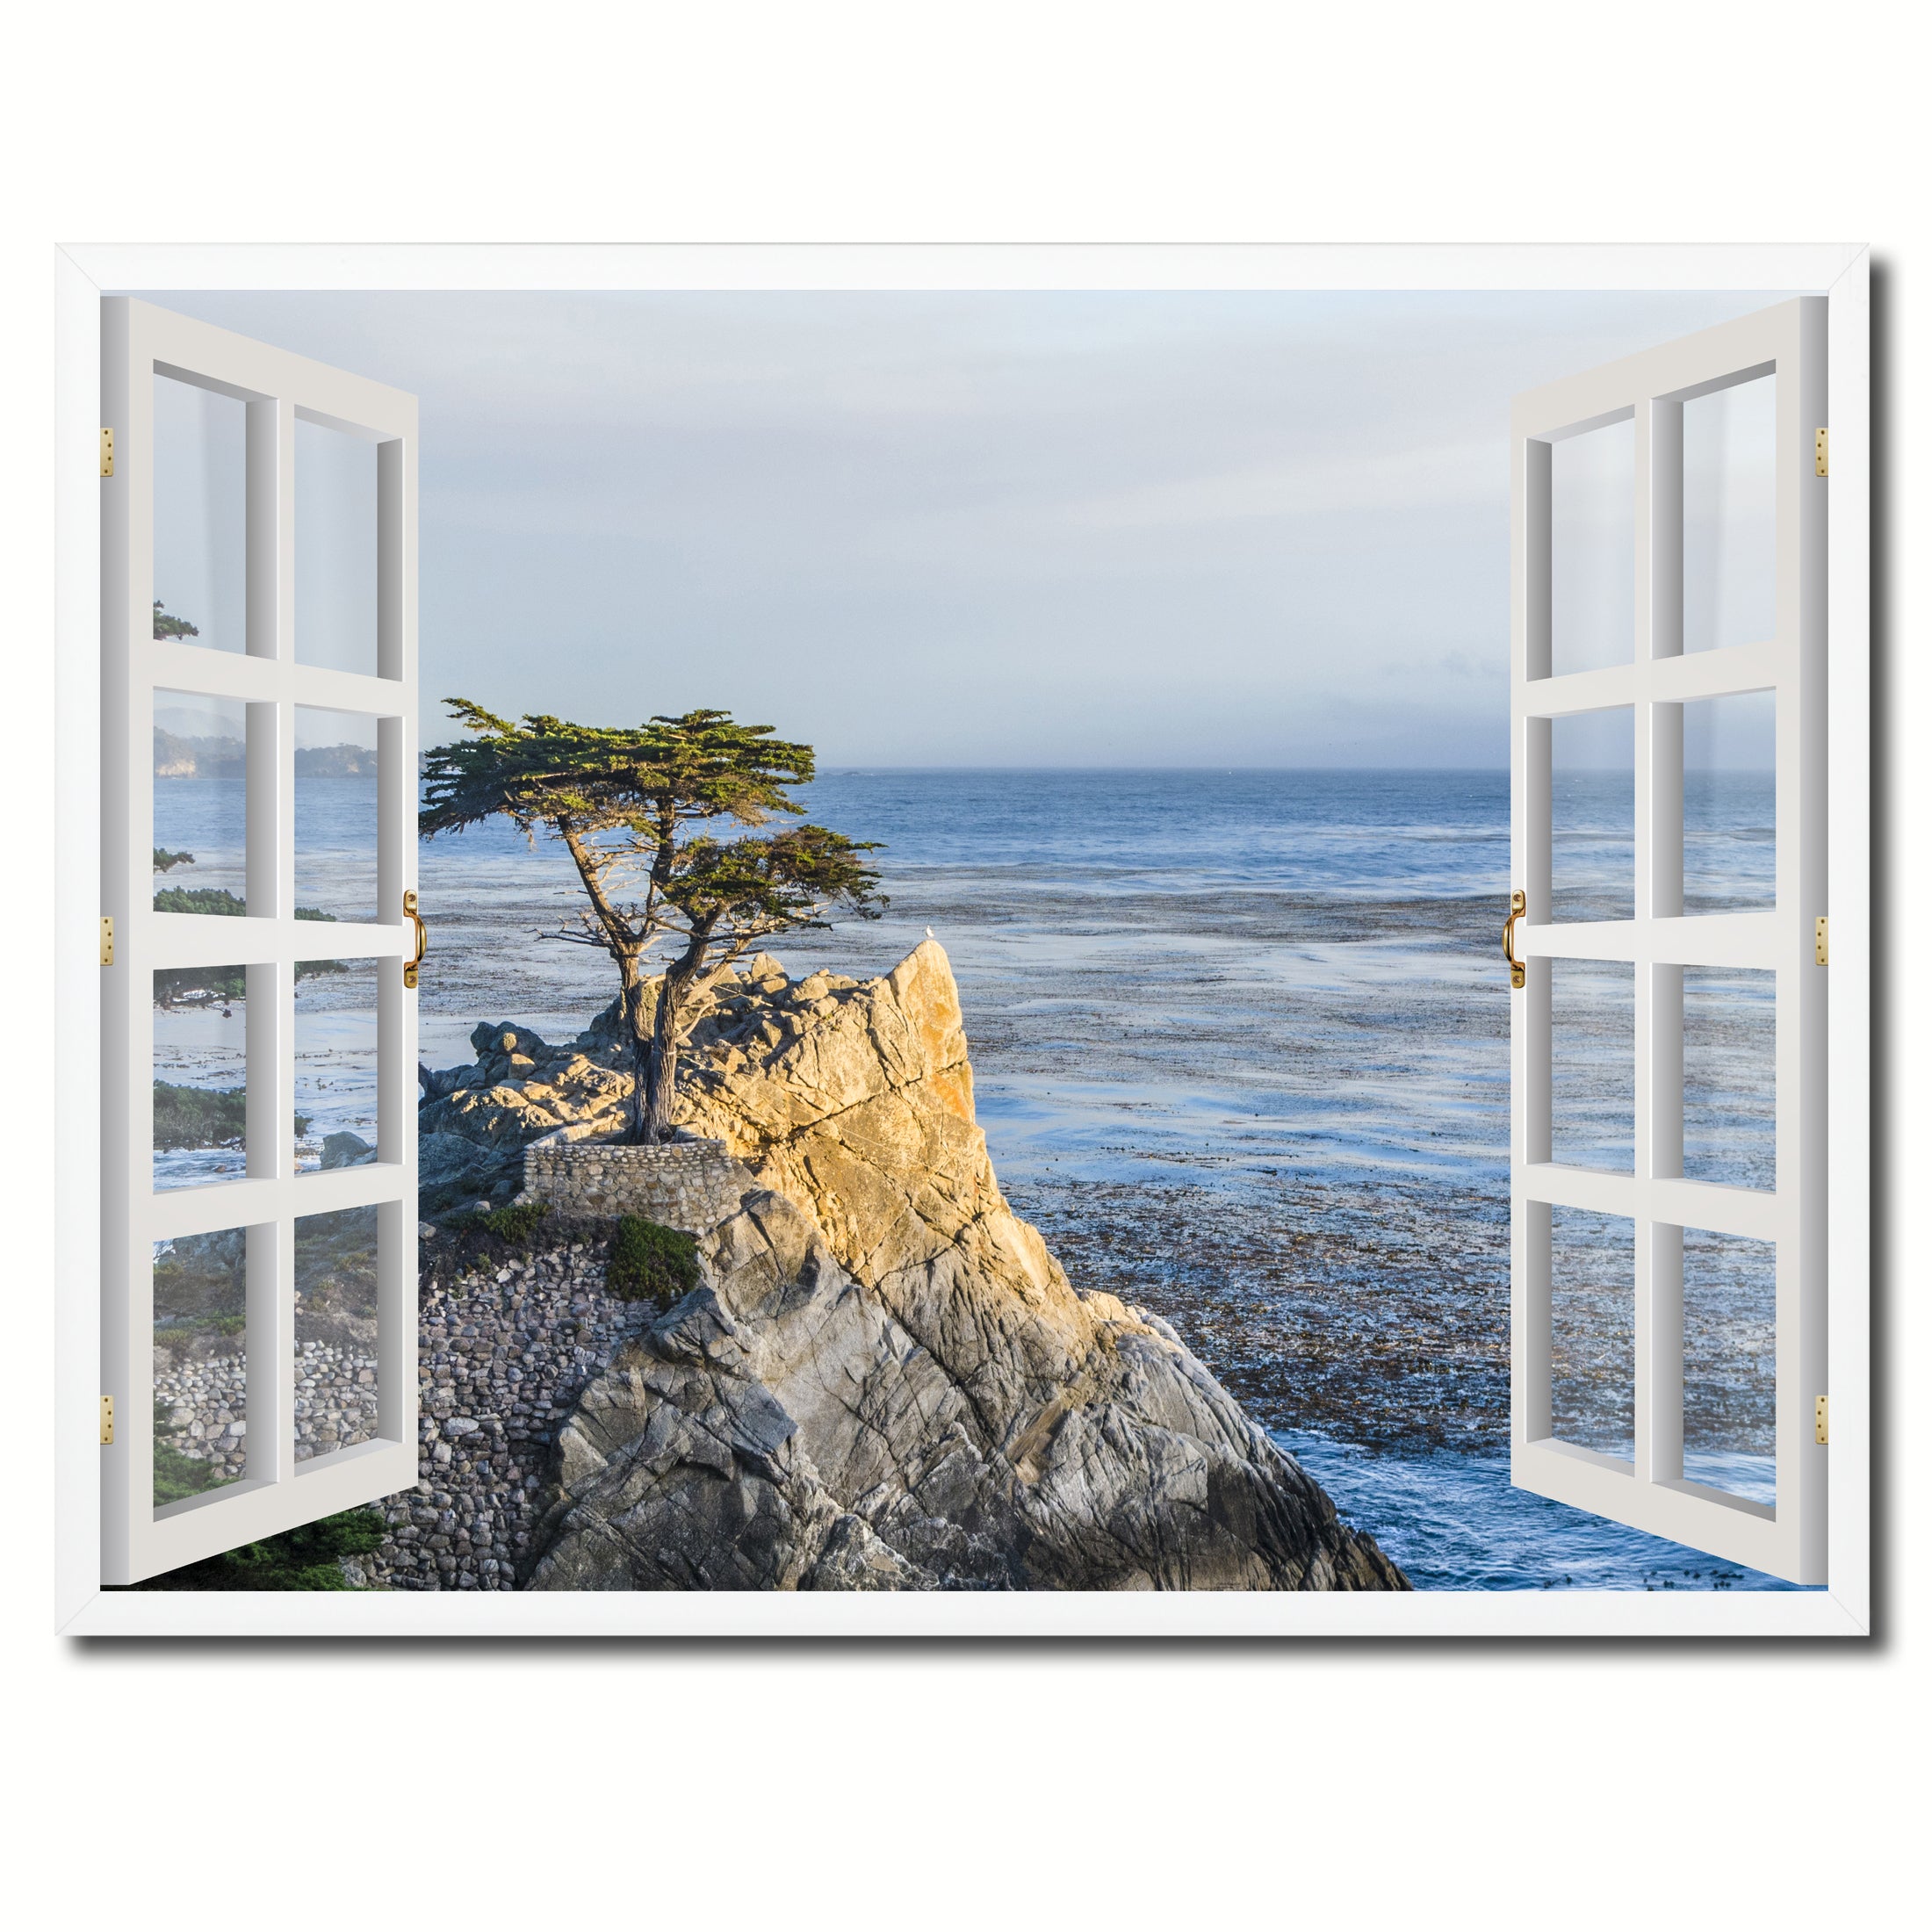 Monterey Beach View Picture French Window Framed Canvas Print Home Decor Wall Art Collection